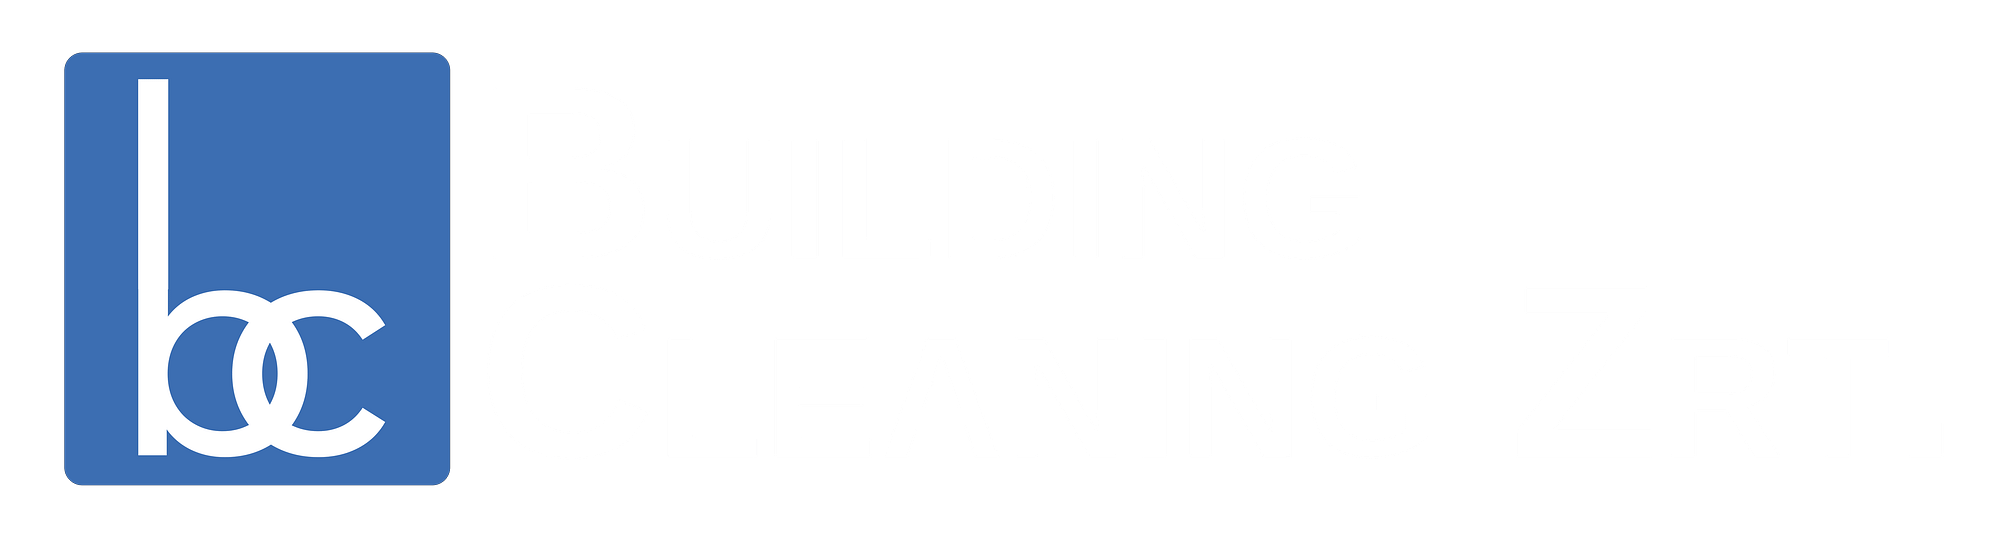 Building Cleaning Zrt.